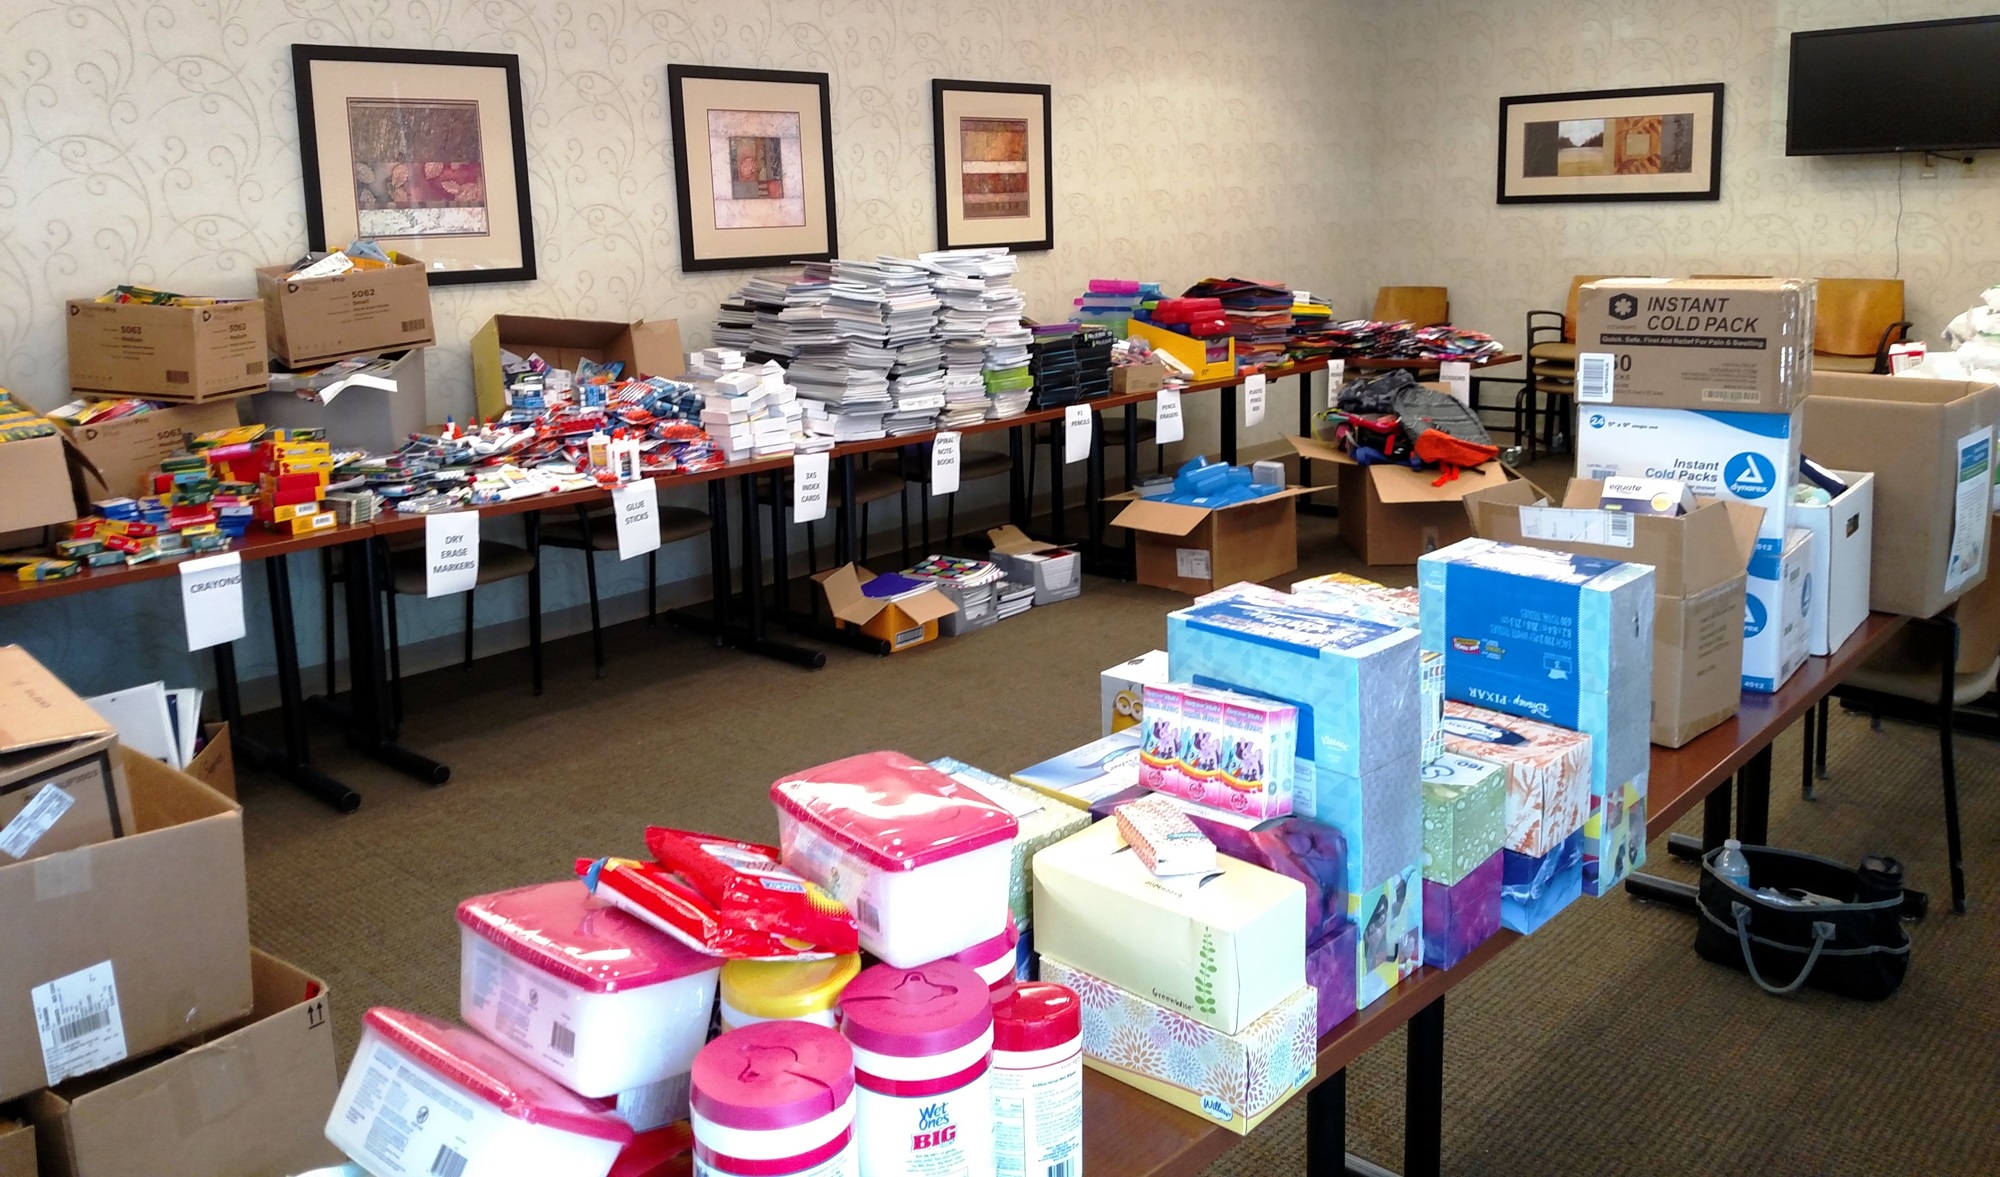 Four local Florida Hospitals, including Florida Hospital Flagler, collected school and medical supplies for the Jewish Federation of Flagler and Volusia counties. Photo courtesy of Lindsay Cashio